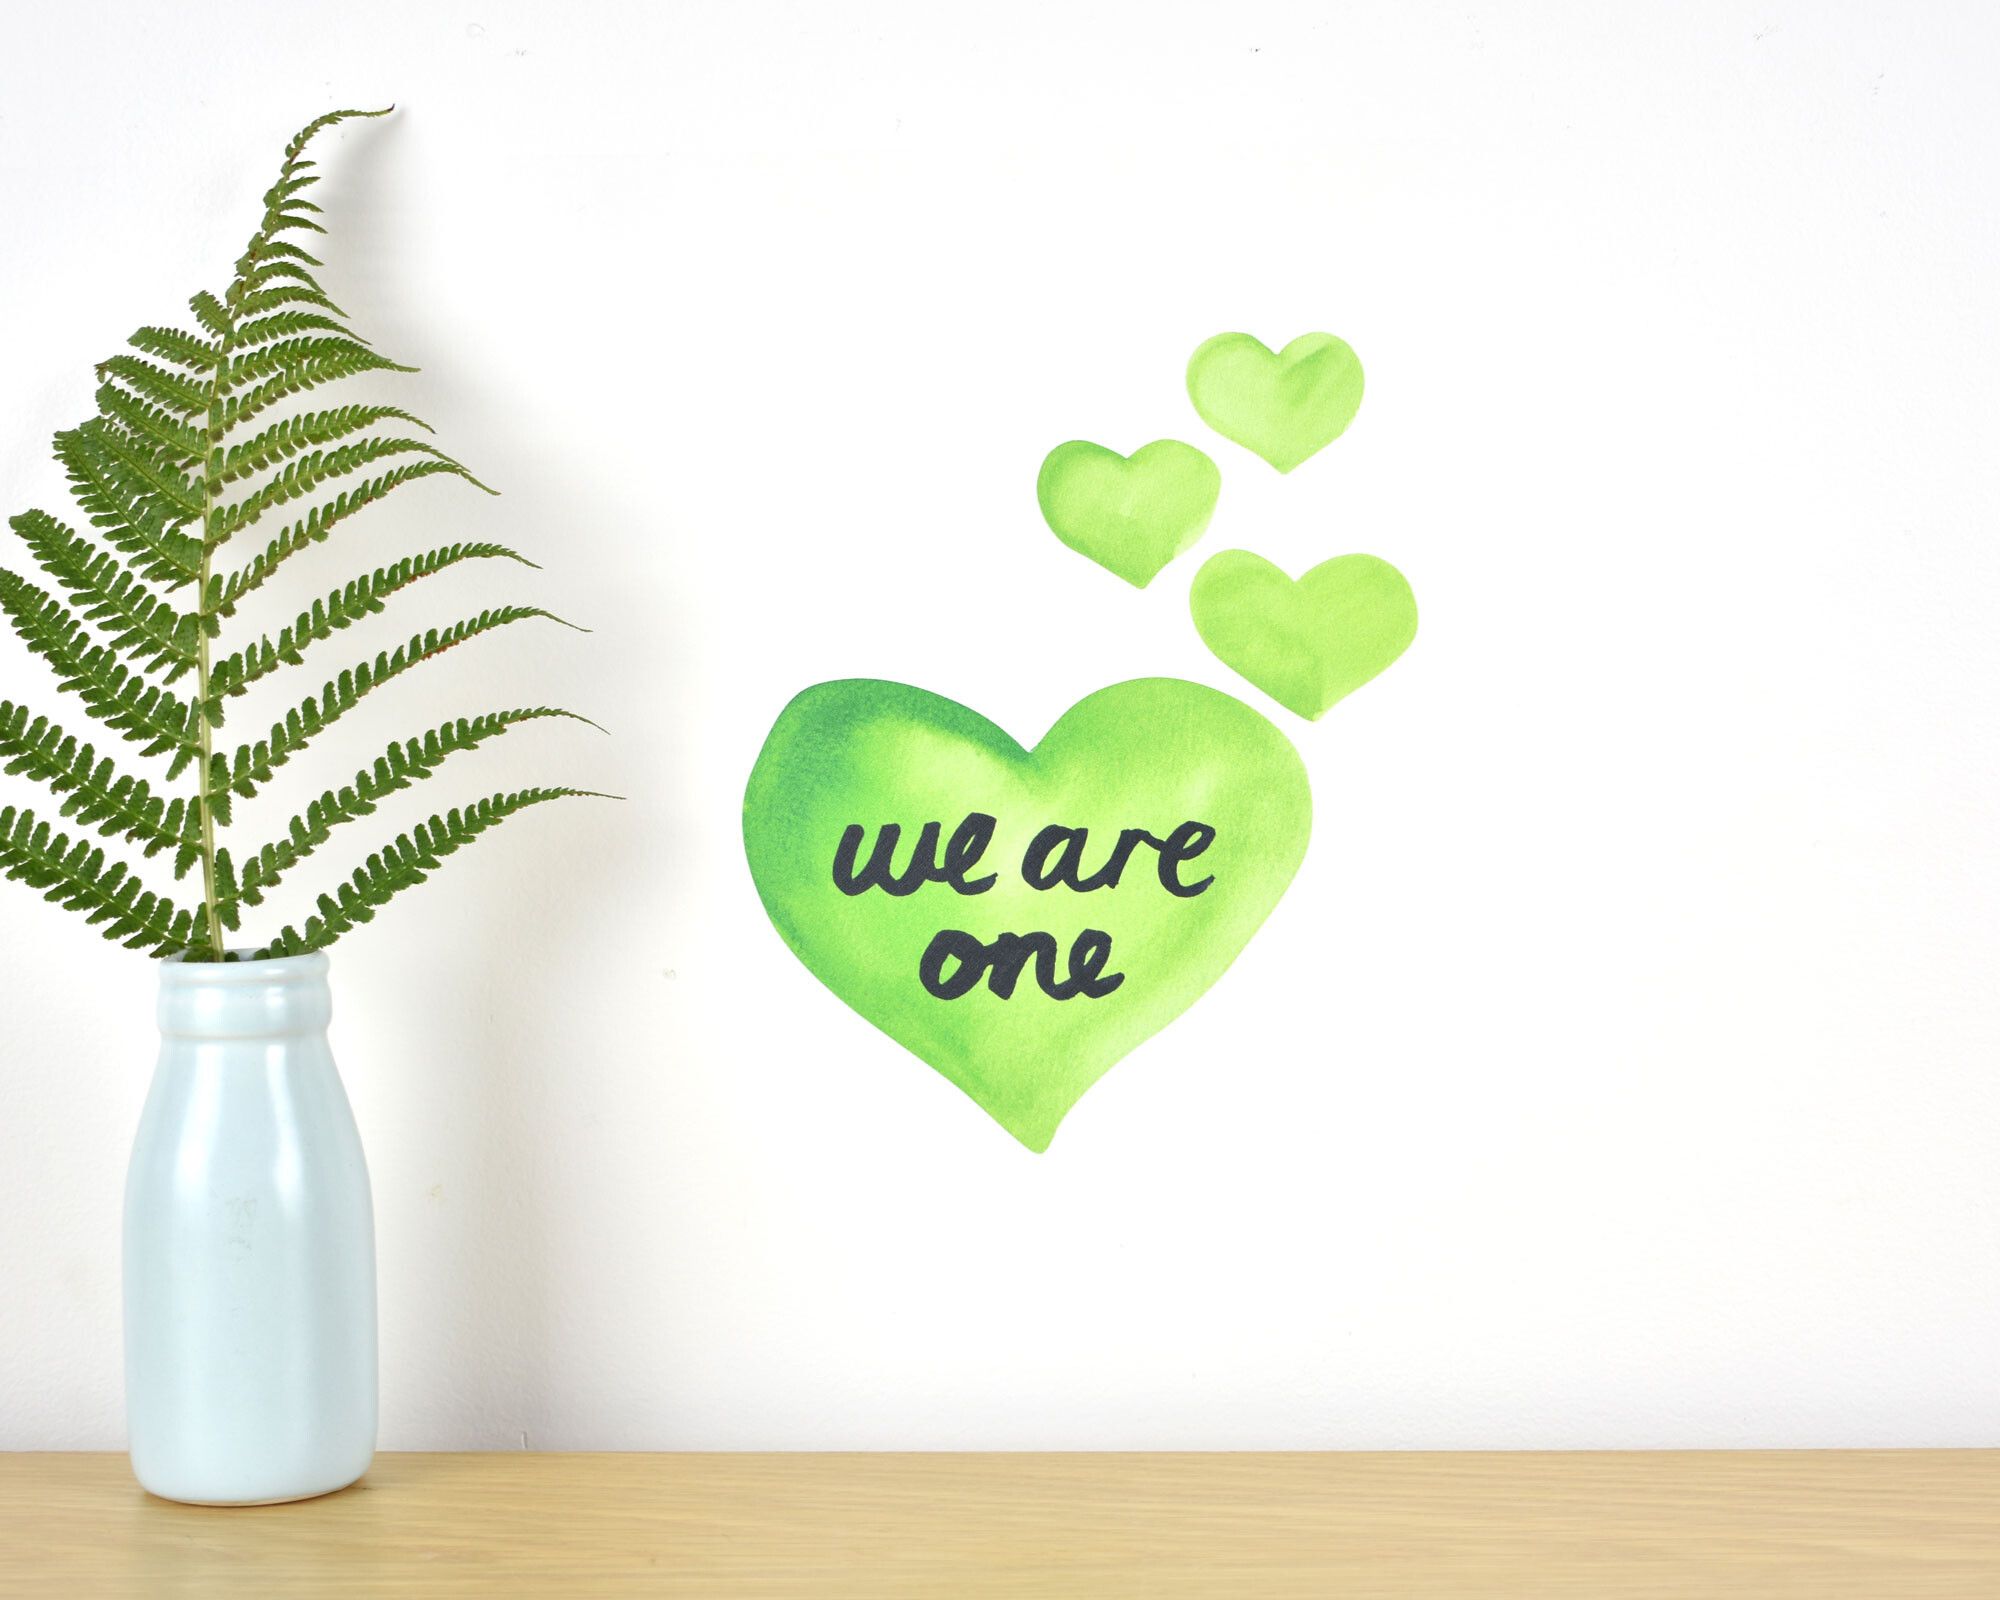 We are one wall decal tiny - fundraising for Christchurch mosque attack victims